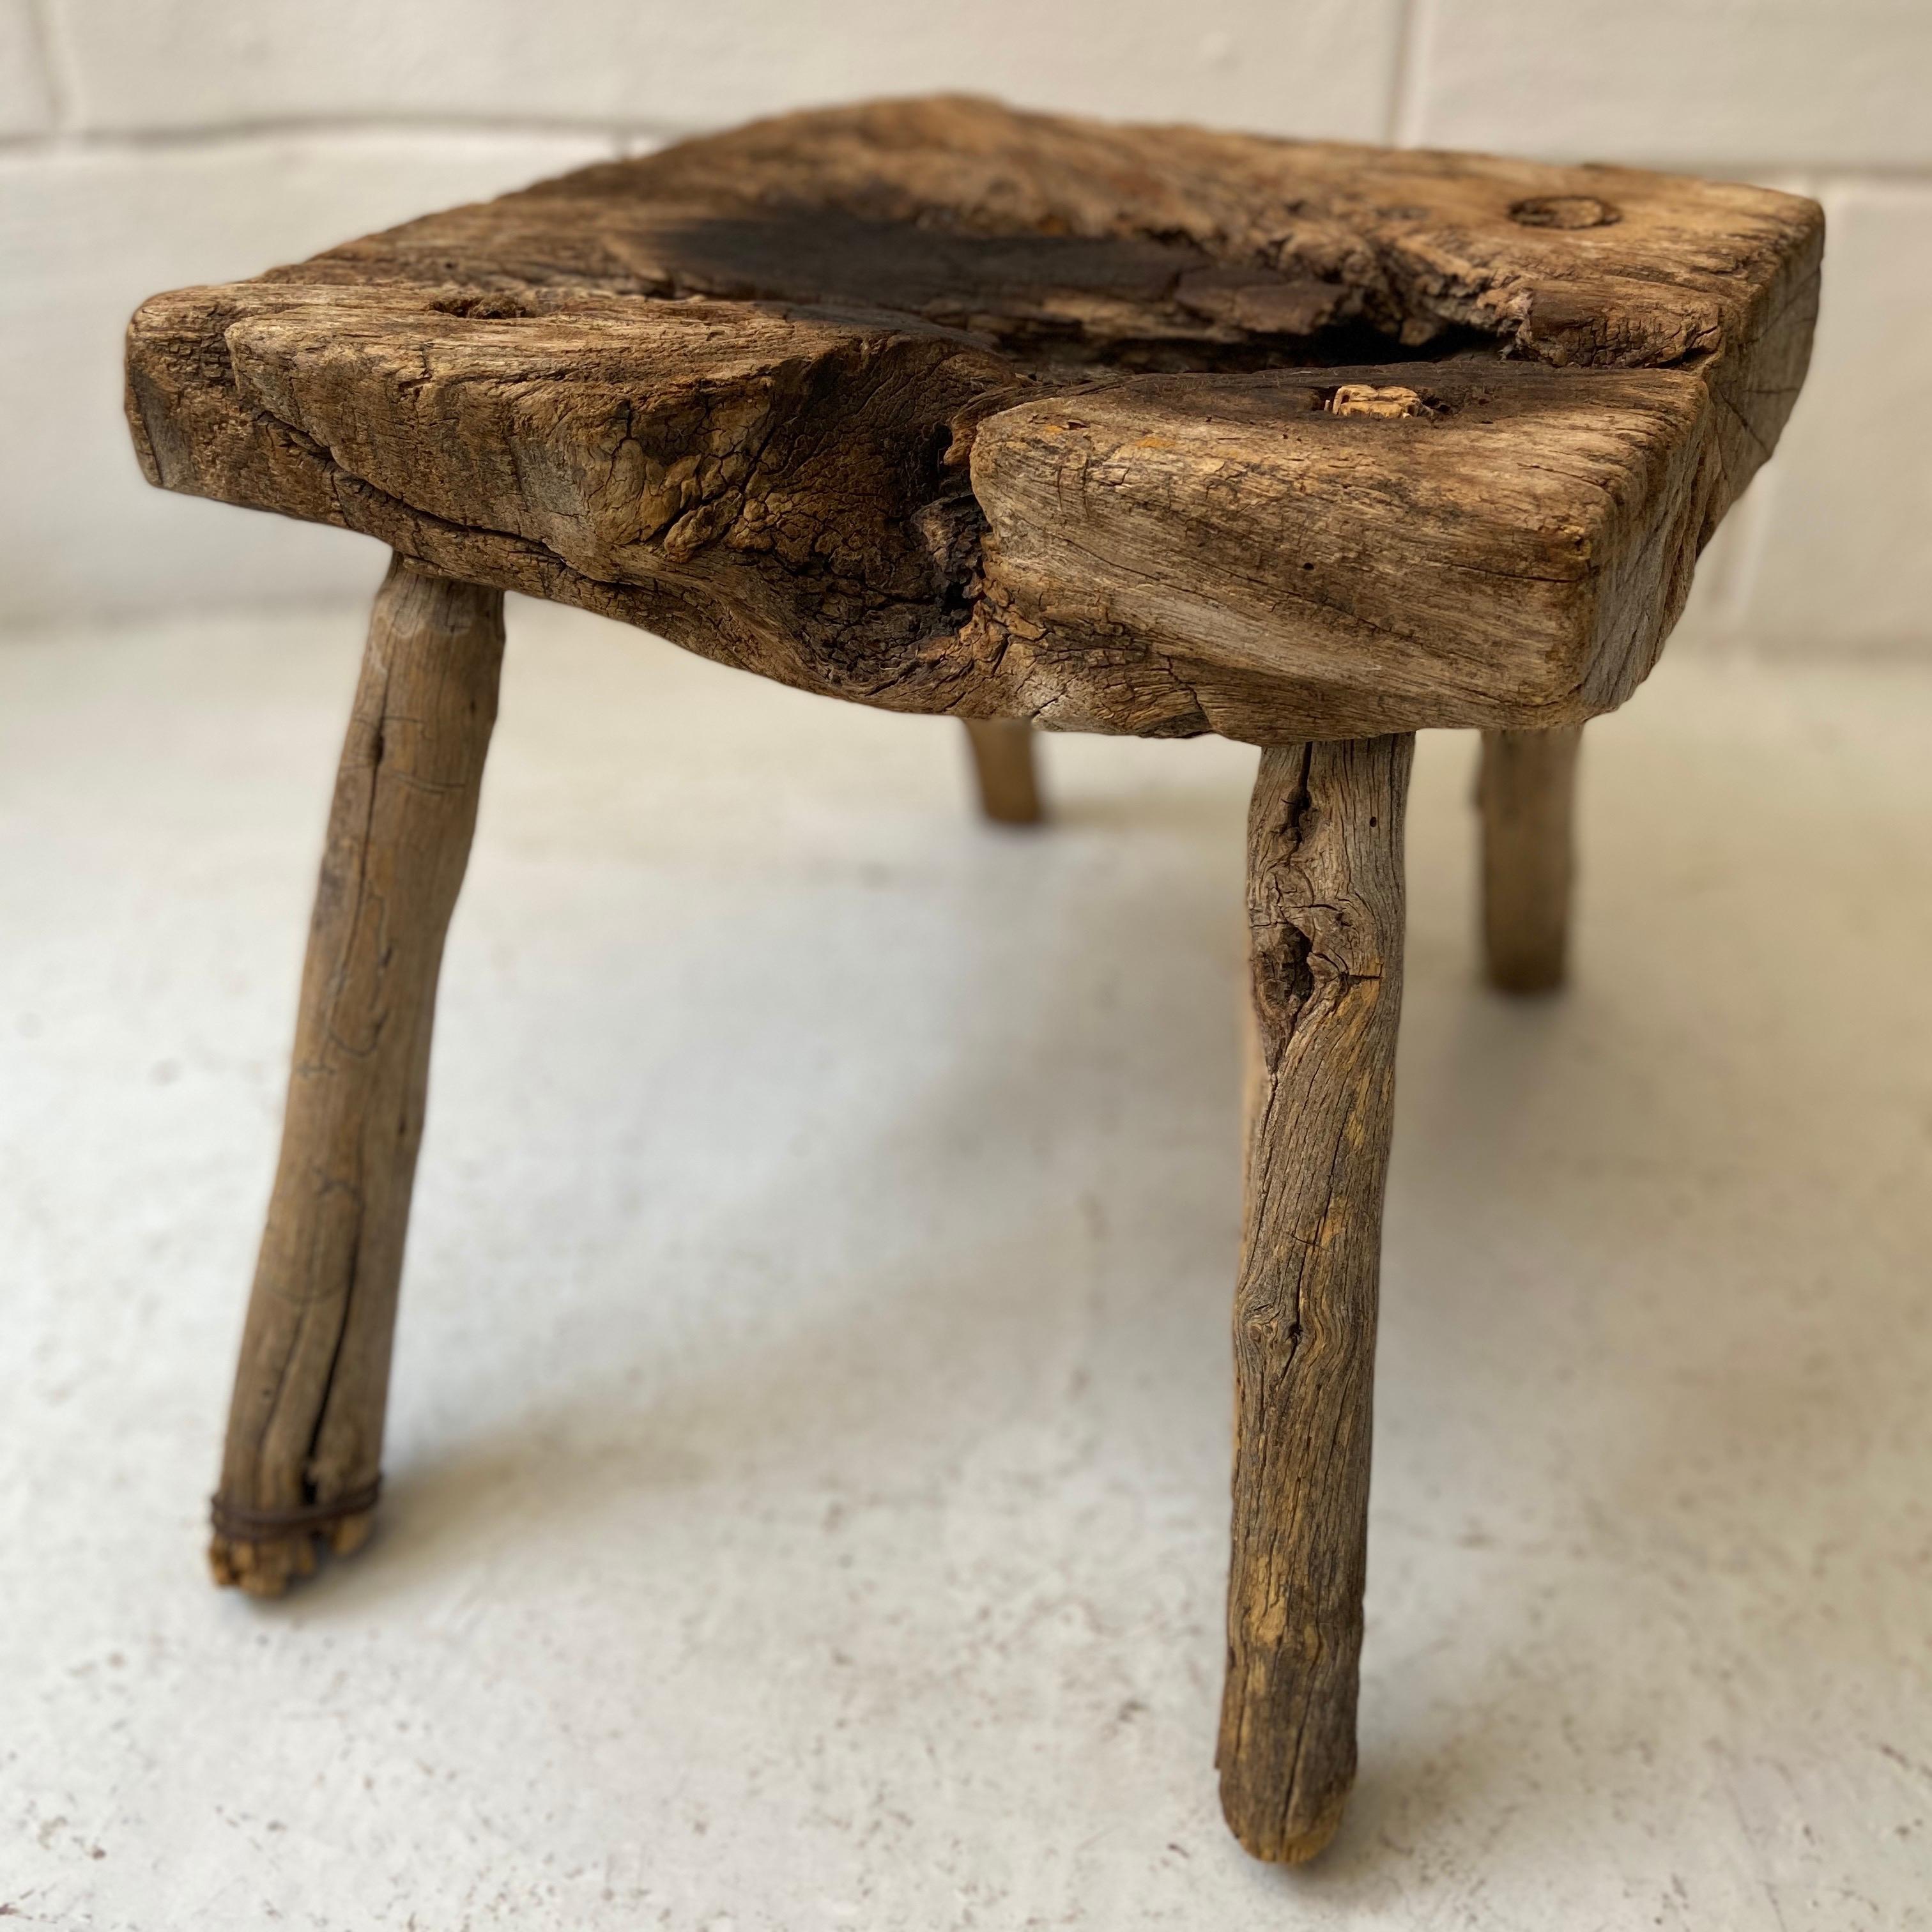 Four legged mesquite stool from Northern Jalisco, Mexico. Partially burnt on the seat. Beautiful character. Restored with all original parts.